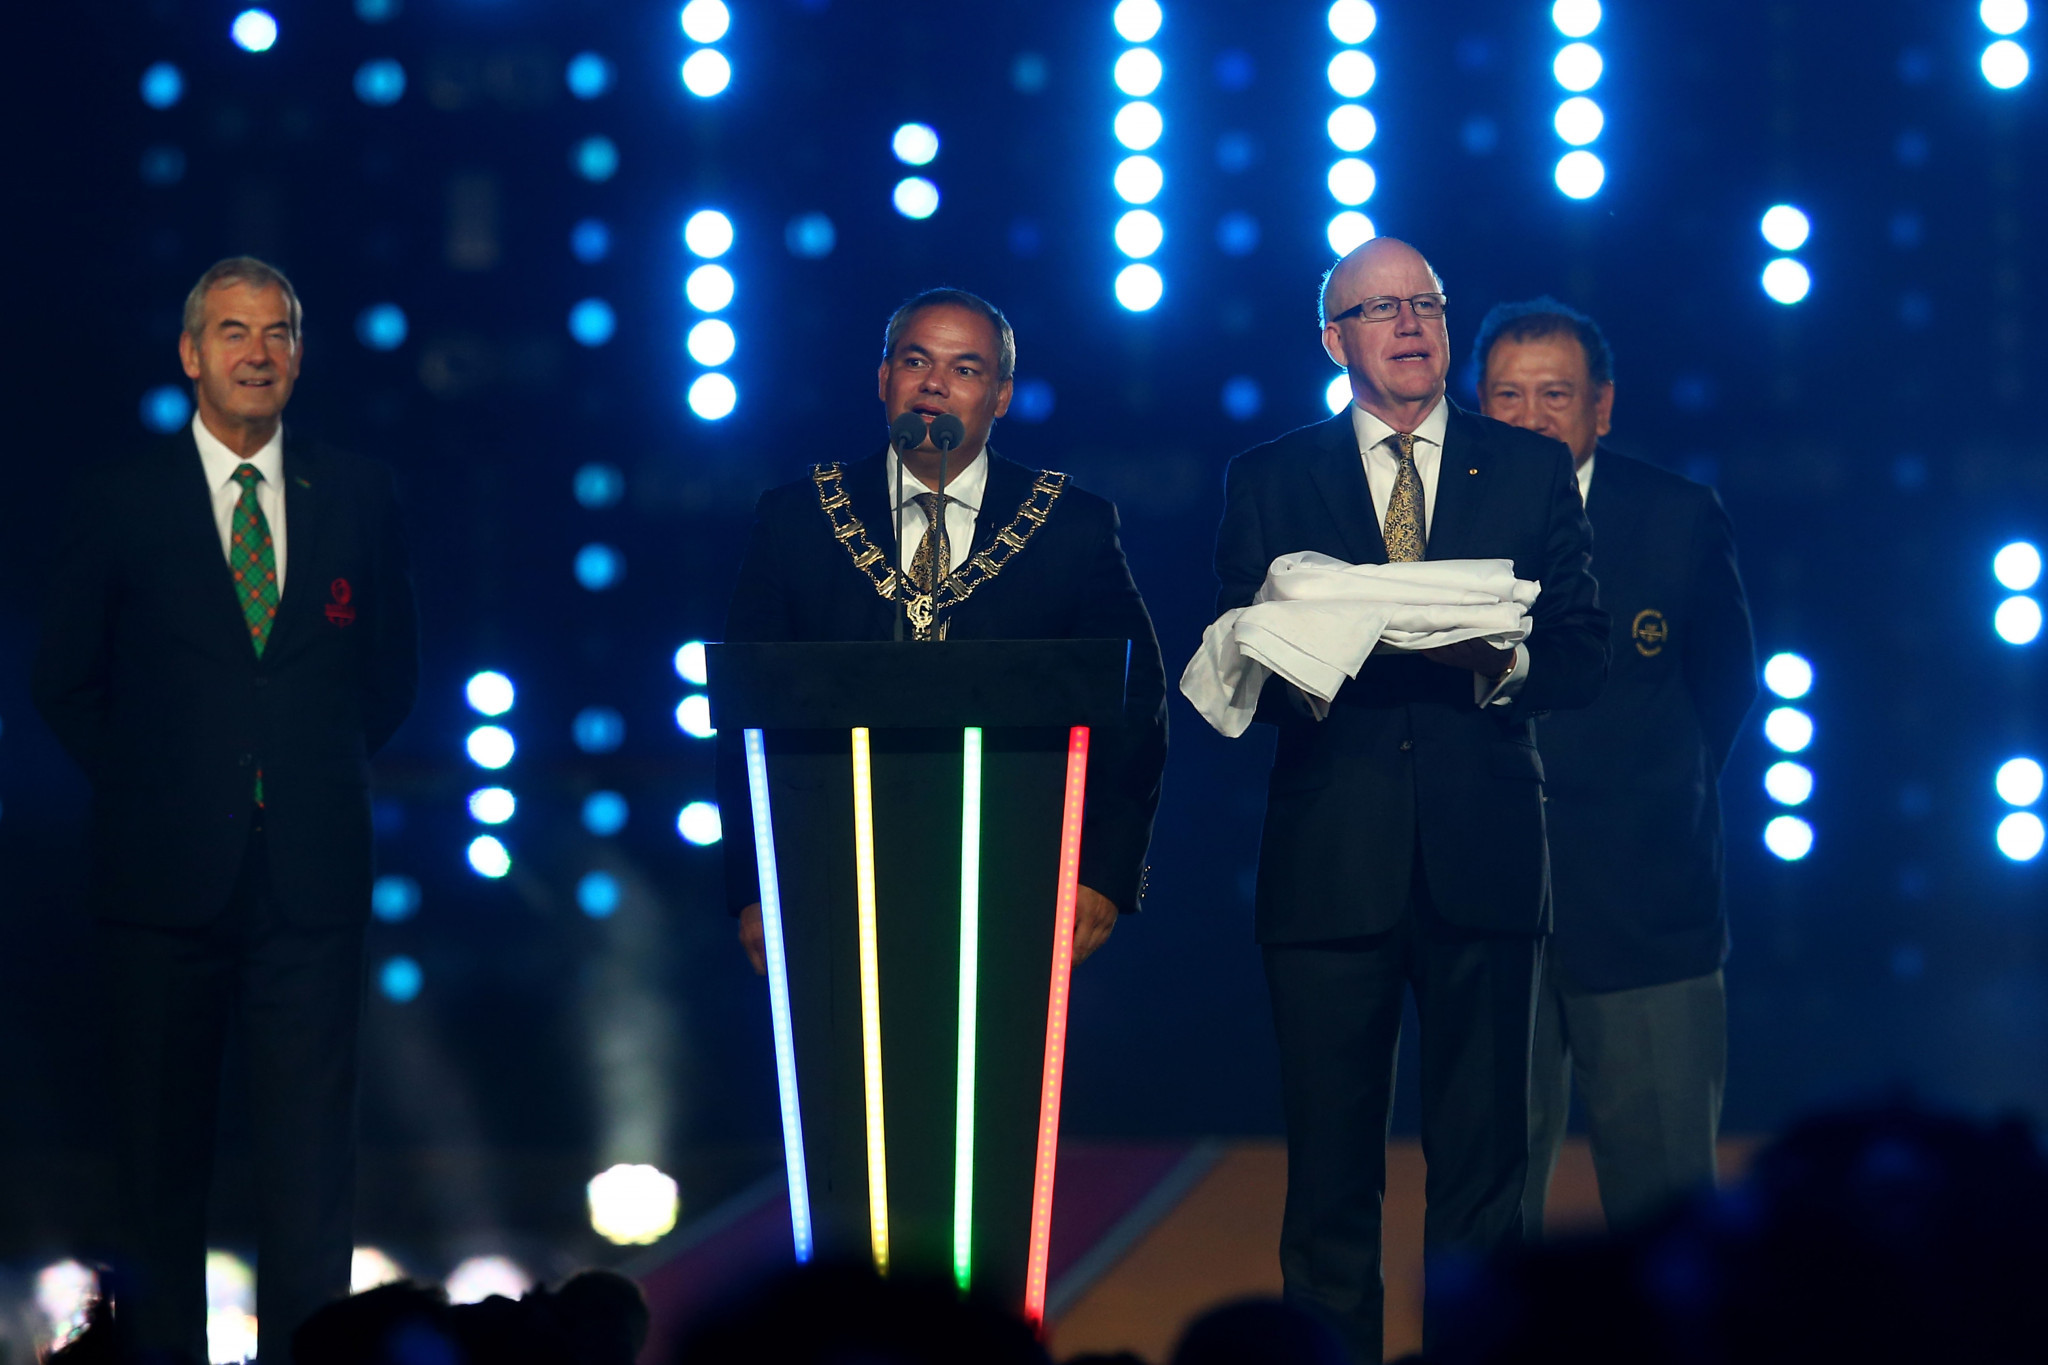 Mayor of the City of Gold Coast, Tom Tate speaks during the Closing Ceremony for the Glasgow 2014 Commonwealth Games at Hampden Park ©Getty Images